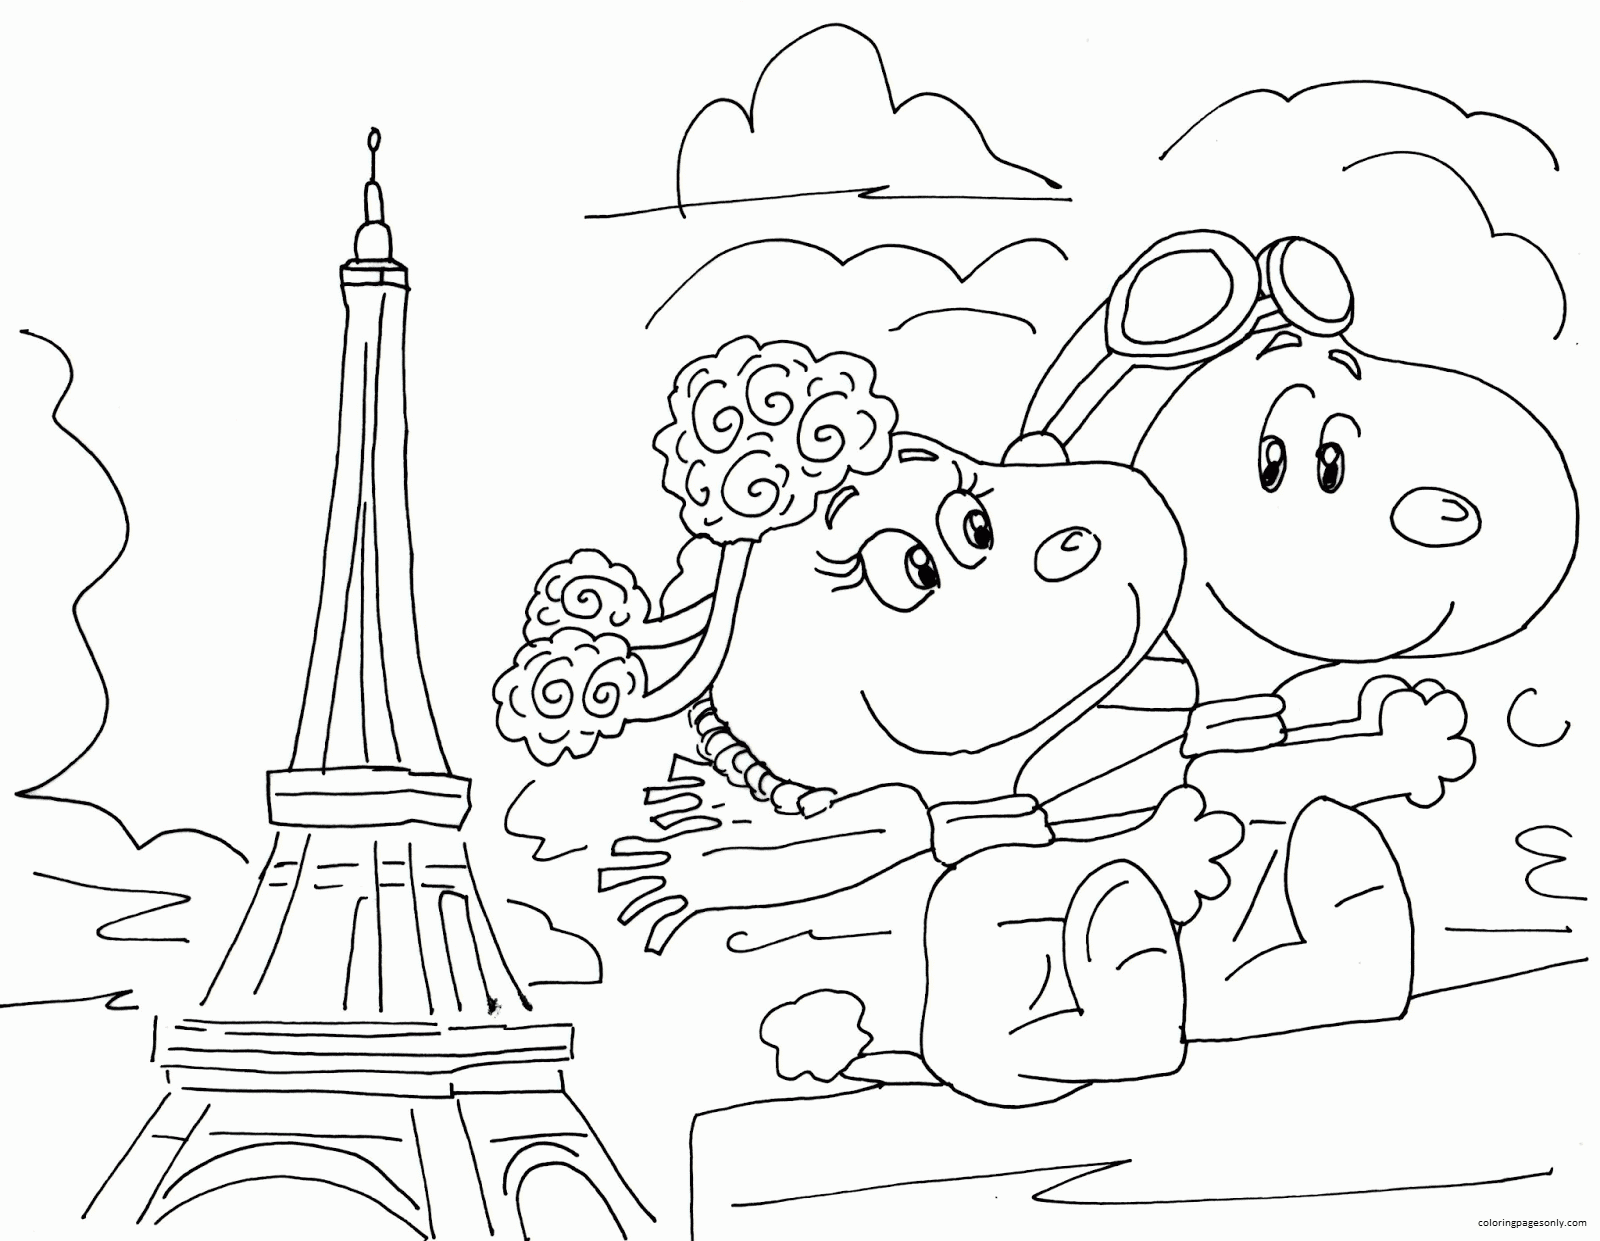 Snoopy Image 1 Coloring Page